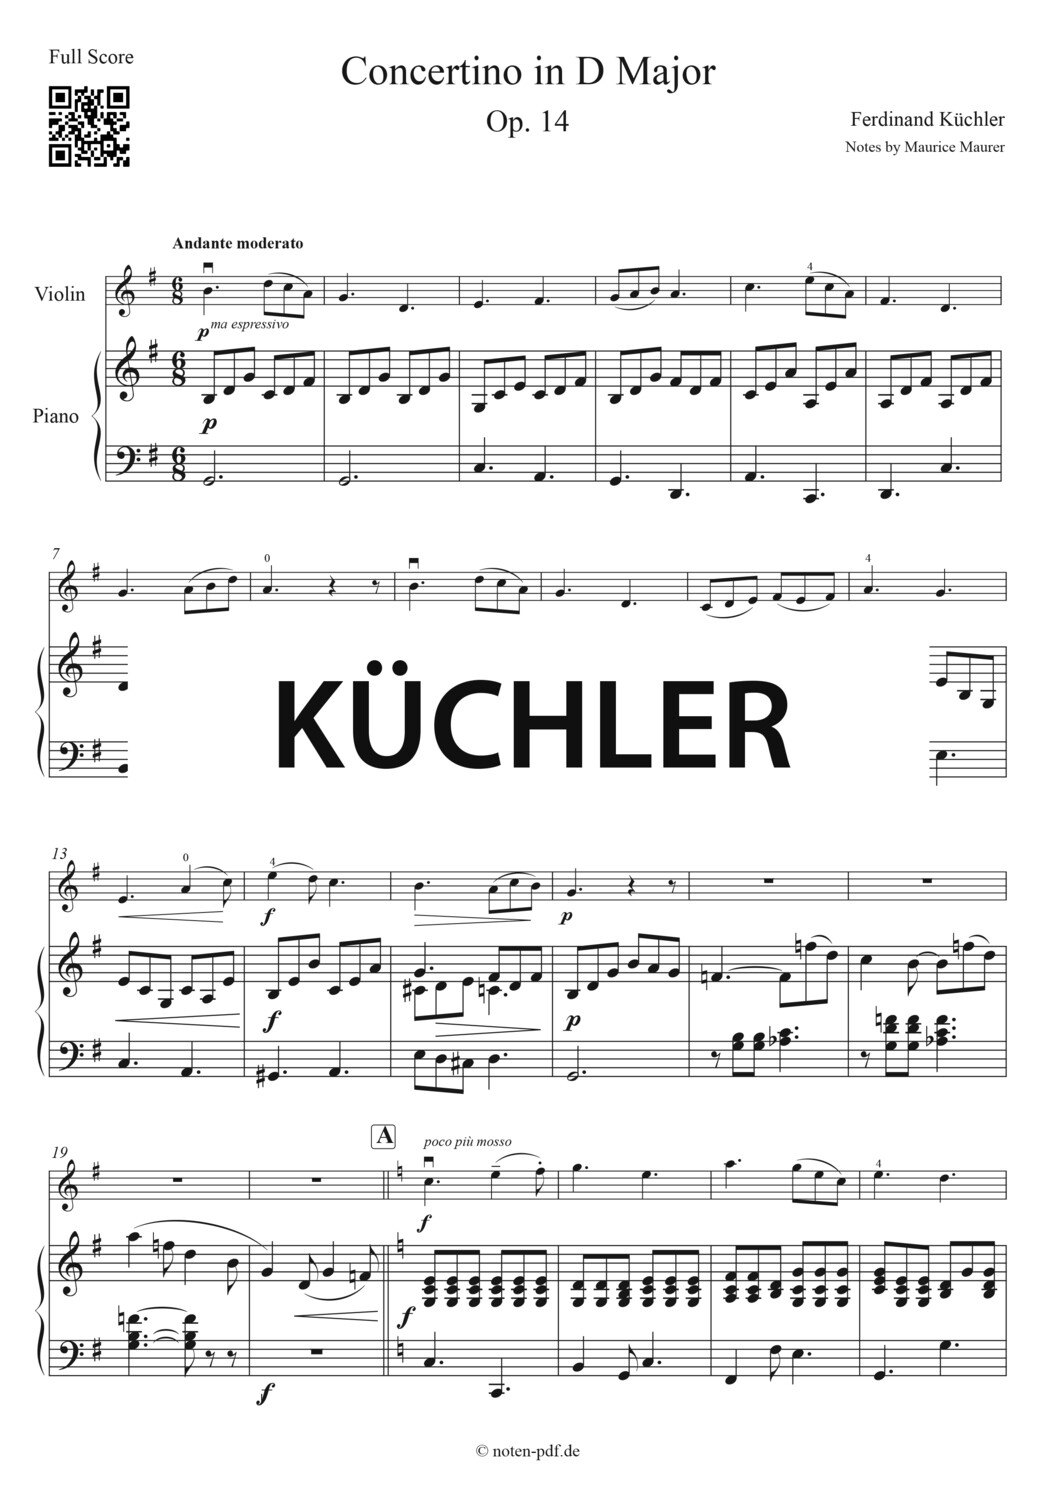 Küchler: Concertino Op. 14 - 2. Movement + MP3